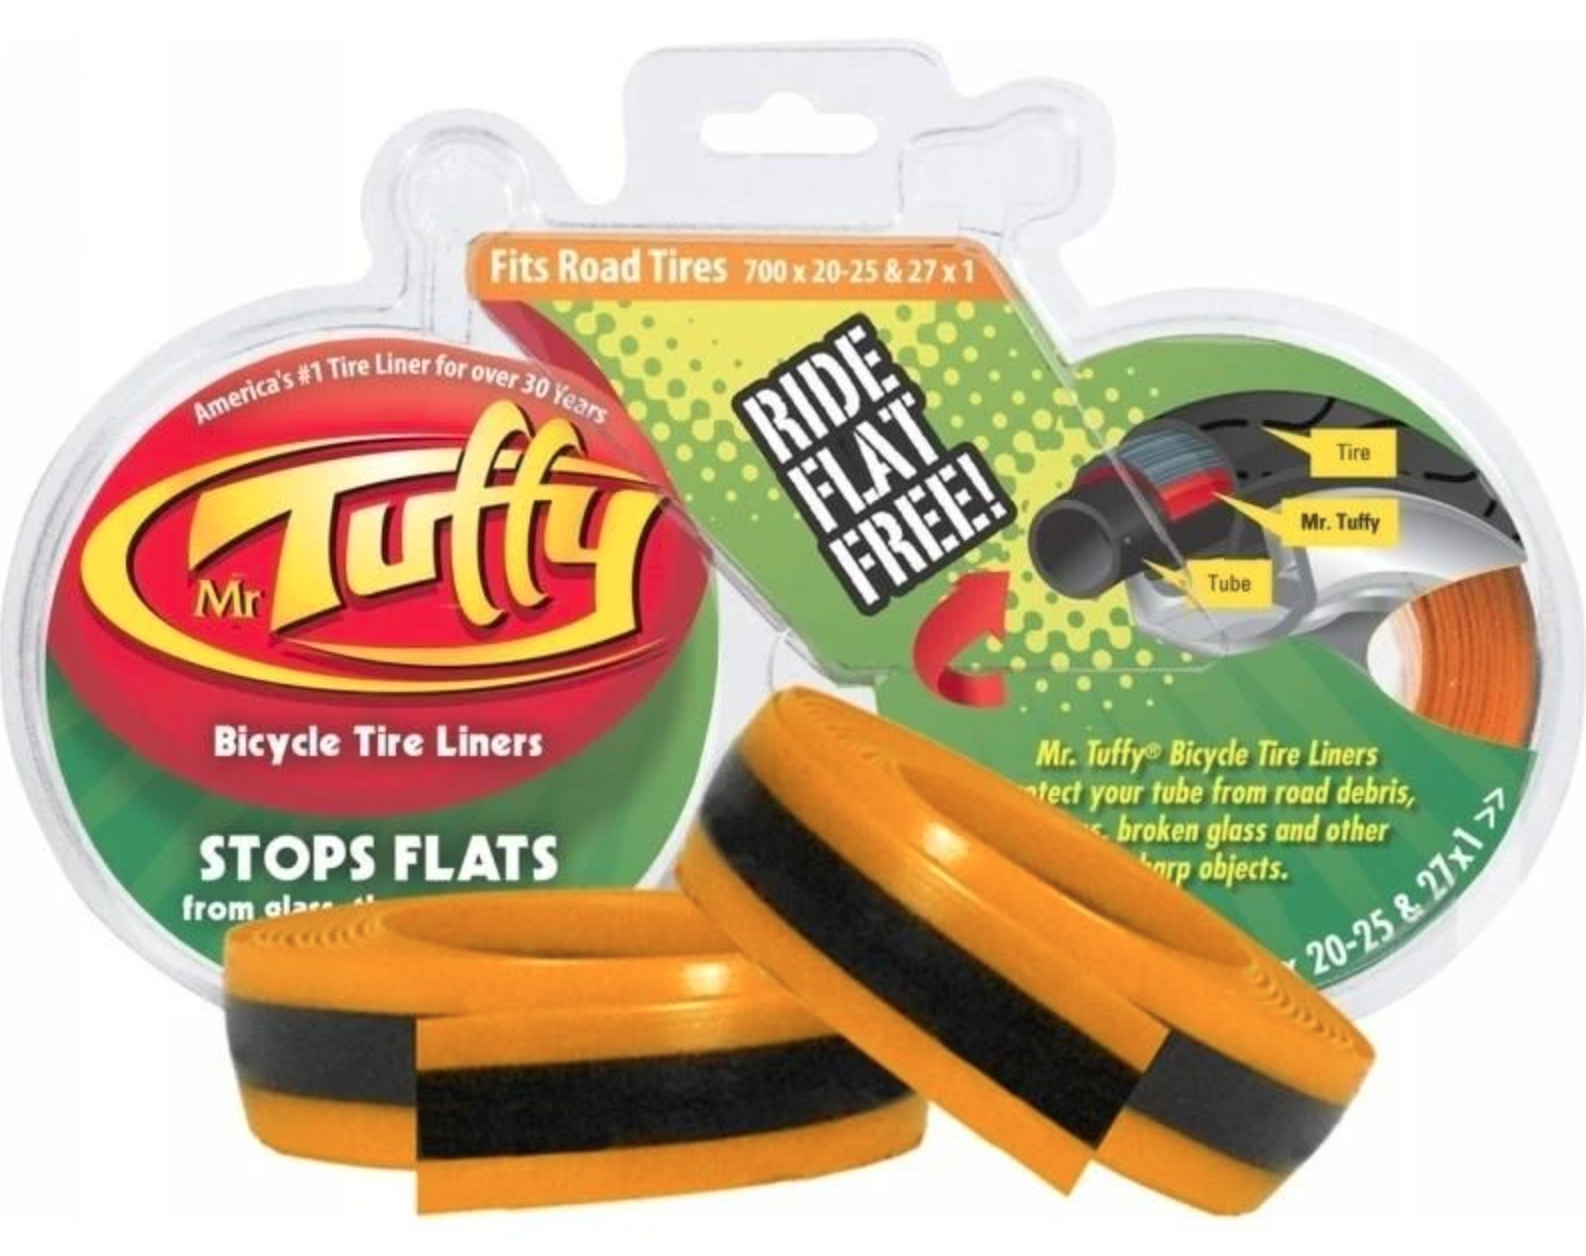 MR TUFFY BICYCLE TIRE LINER YELLOW 20 X 1.5-1.9" PAIR 